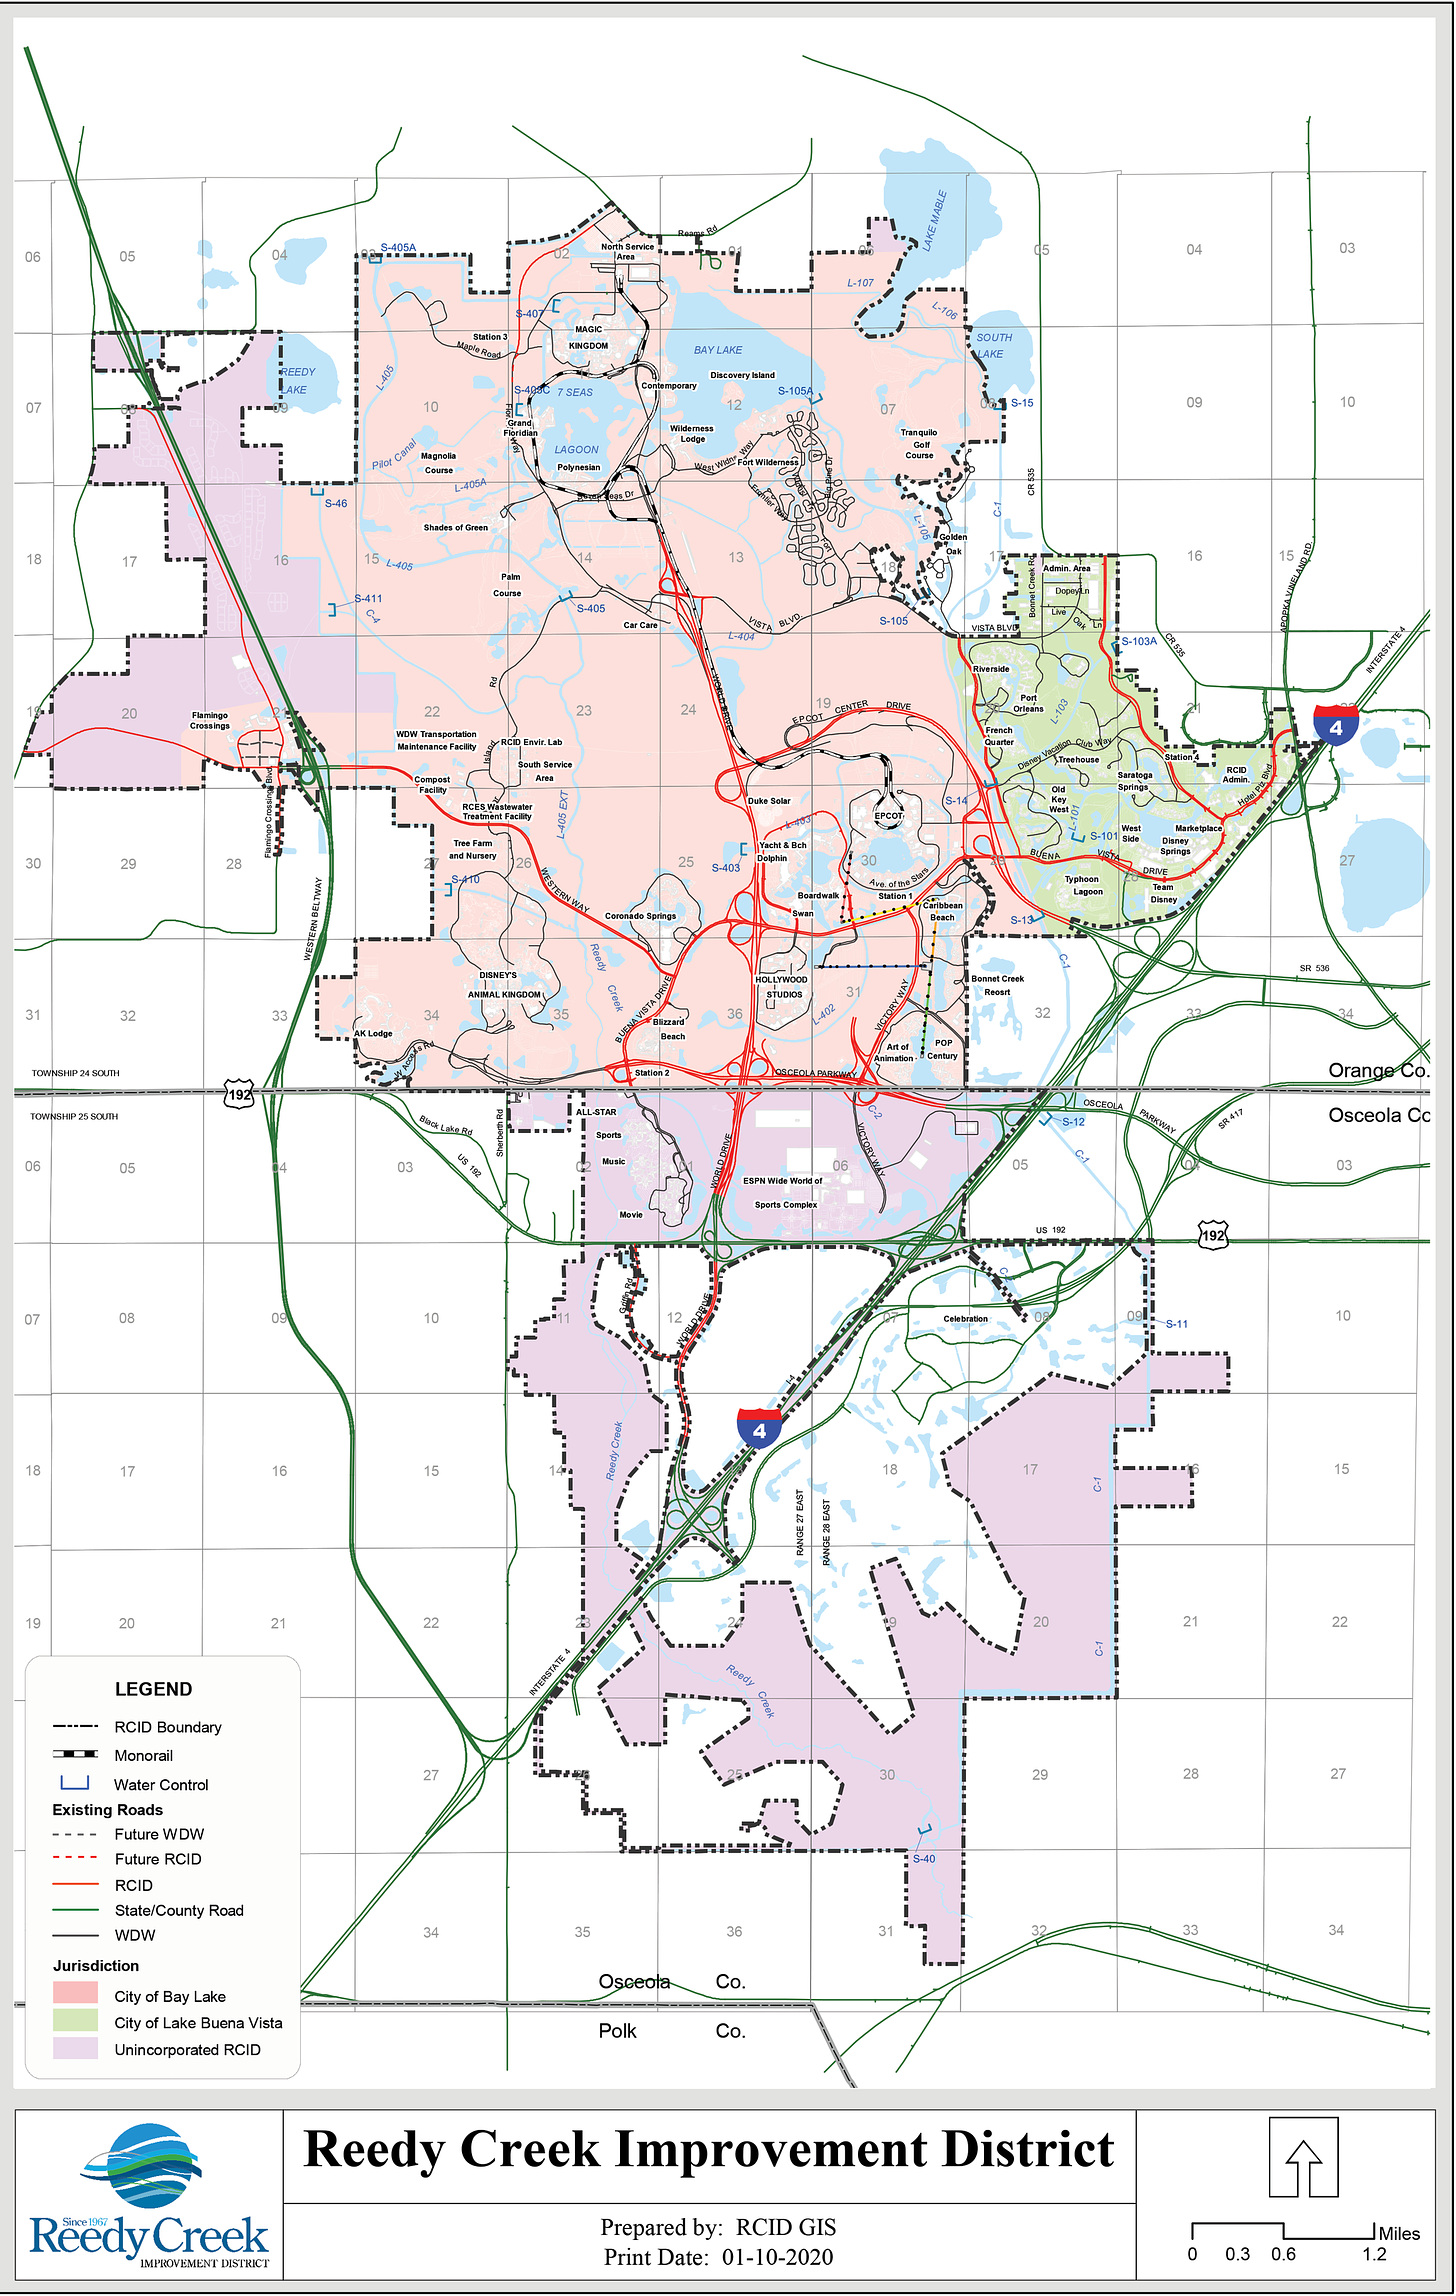 Map of the Reedy Creek Improvement District's boundaries in 2020.